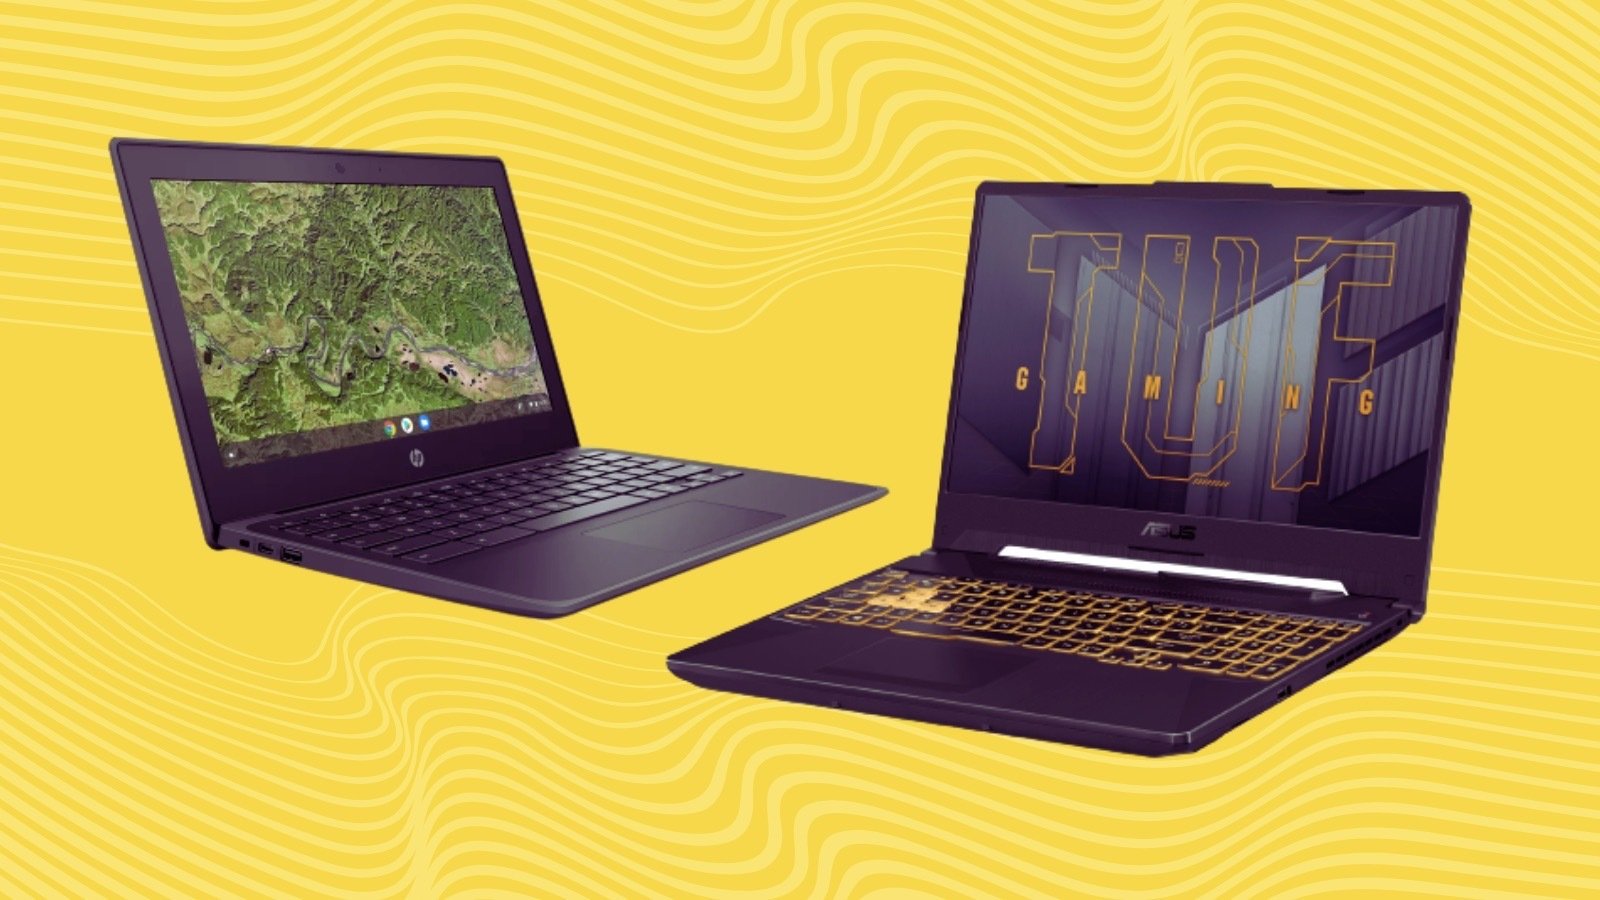 Cheap Chromebooks and gaming laptops are staples of Walmart’s Cyber Monday sale